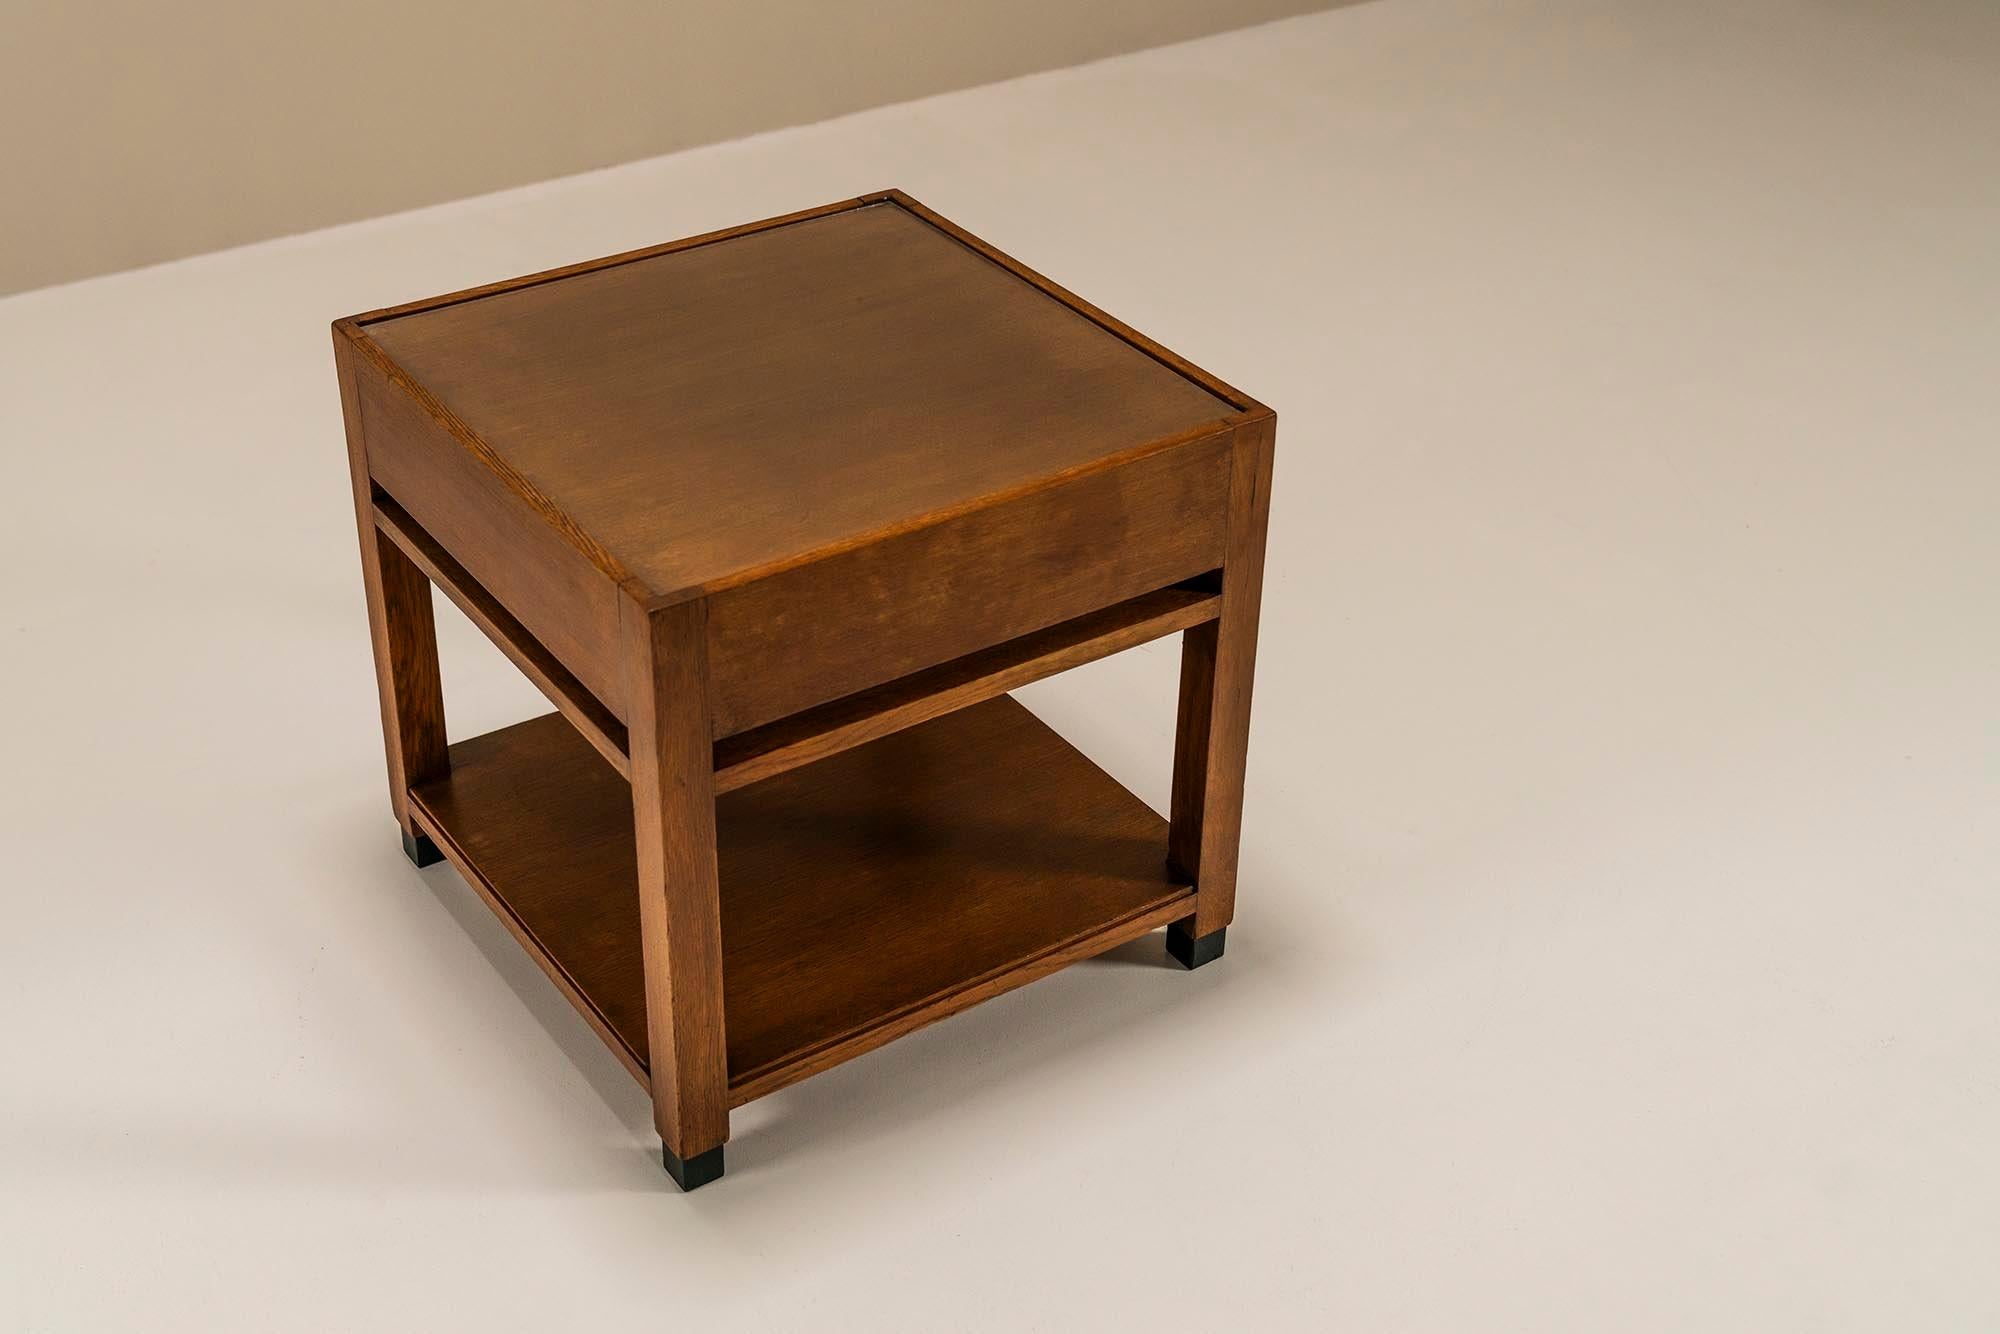 Mid-20th Century The Hague School Square Coffee Table In Oak, The Netherlands 1930s For Sale